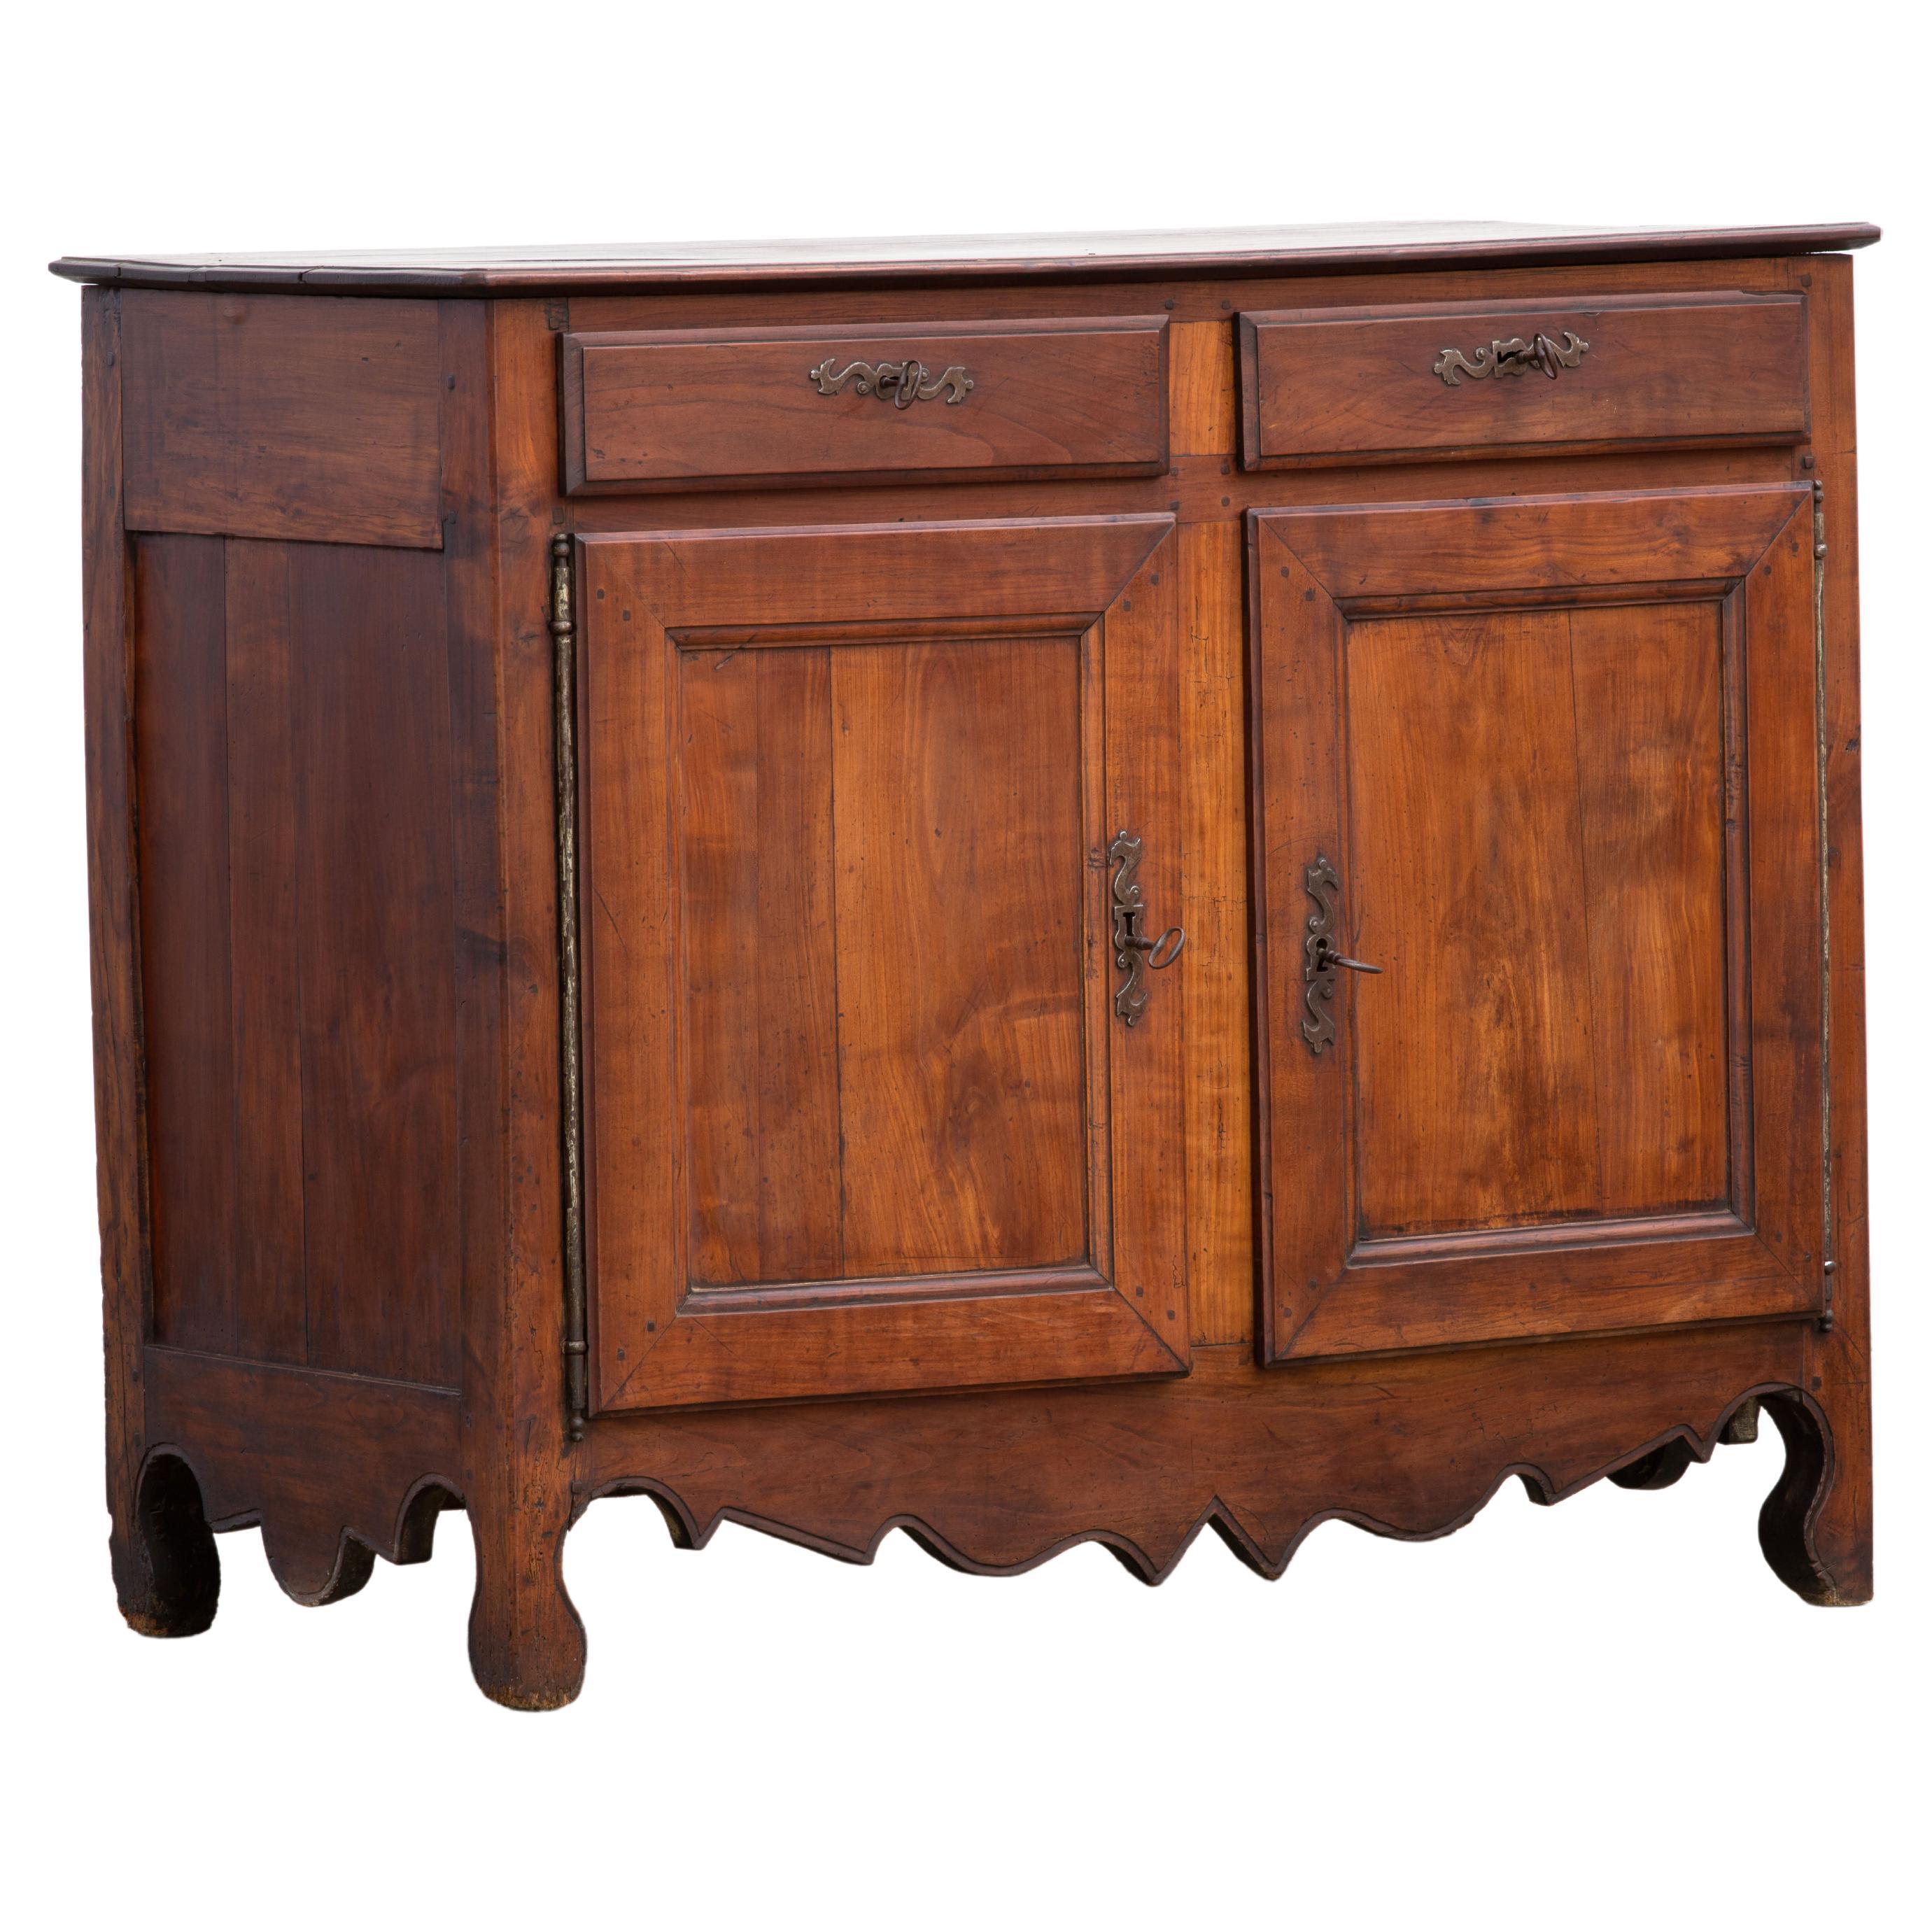 19th Century French Provencal Oak Buffet Cabinet